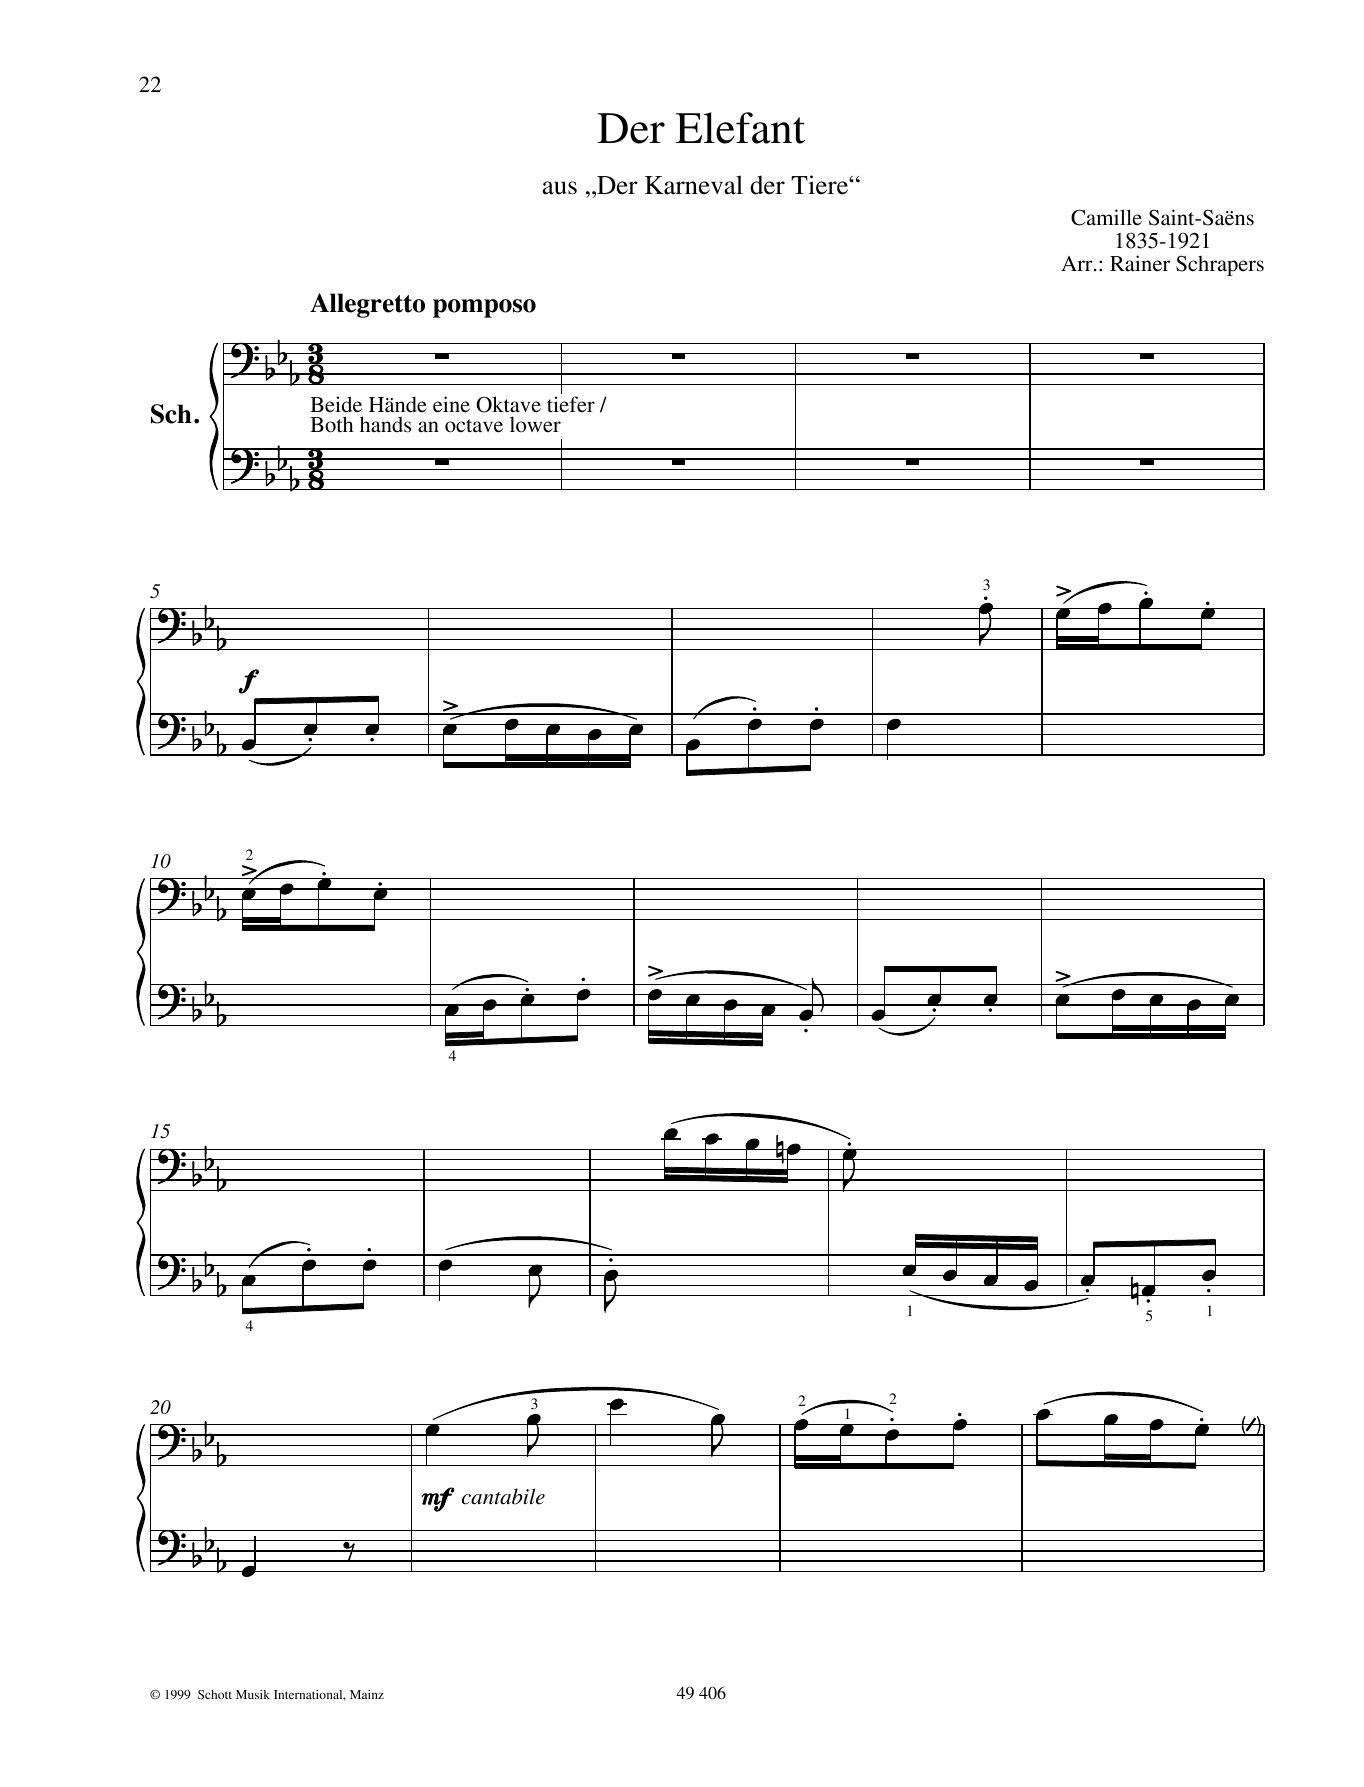 Download Camille Saint-Saëns The Elephant Sheet Music